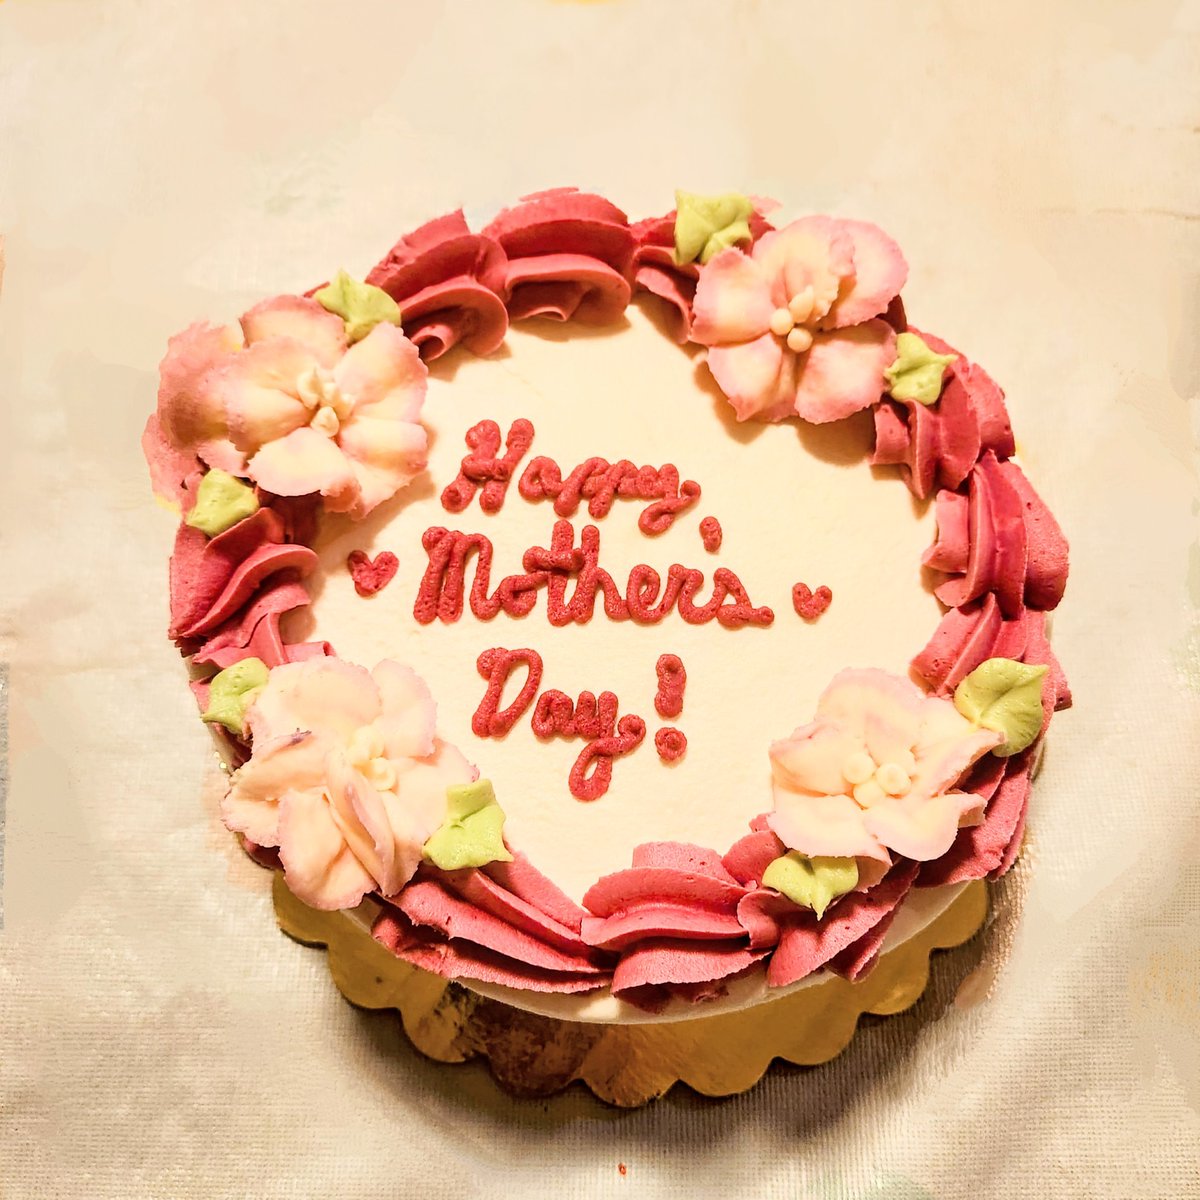 Happy Mother's Day!!! visainfo@immigrate2.us g.page/letushandle #immigrate #usimmigrationlawyer #ImmigratetoUSA #SoftwareDeveloper #F1Visa #HCAP #L1A #L1B #H4EAD #L2EAD #changeofstatus #LegalImmigration #workvisausa #h1blottery #H1B #USImmigration #h1bcap #globalmobility